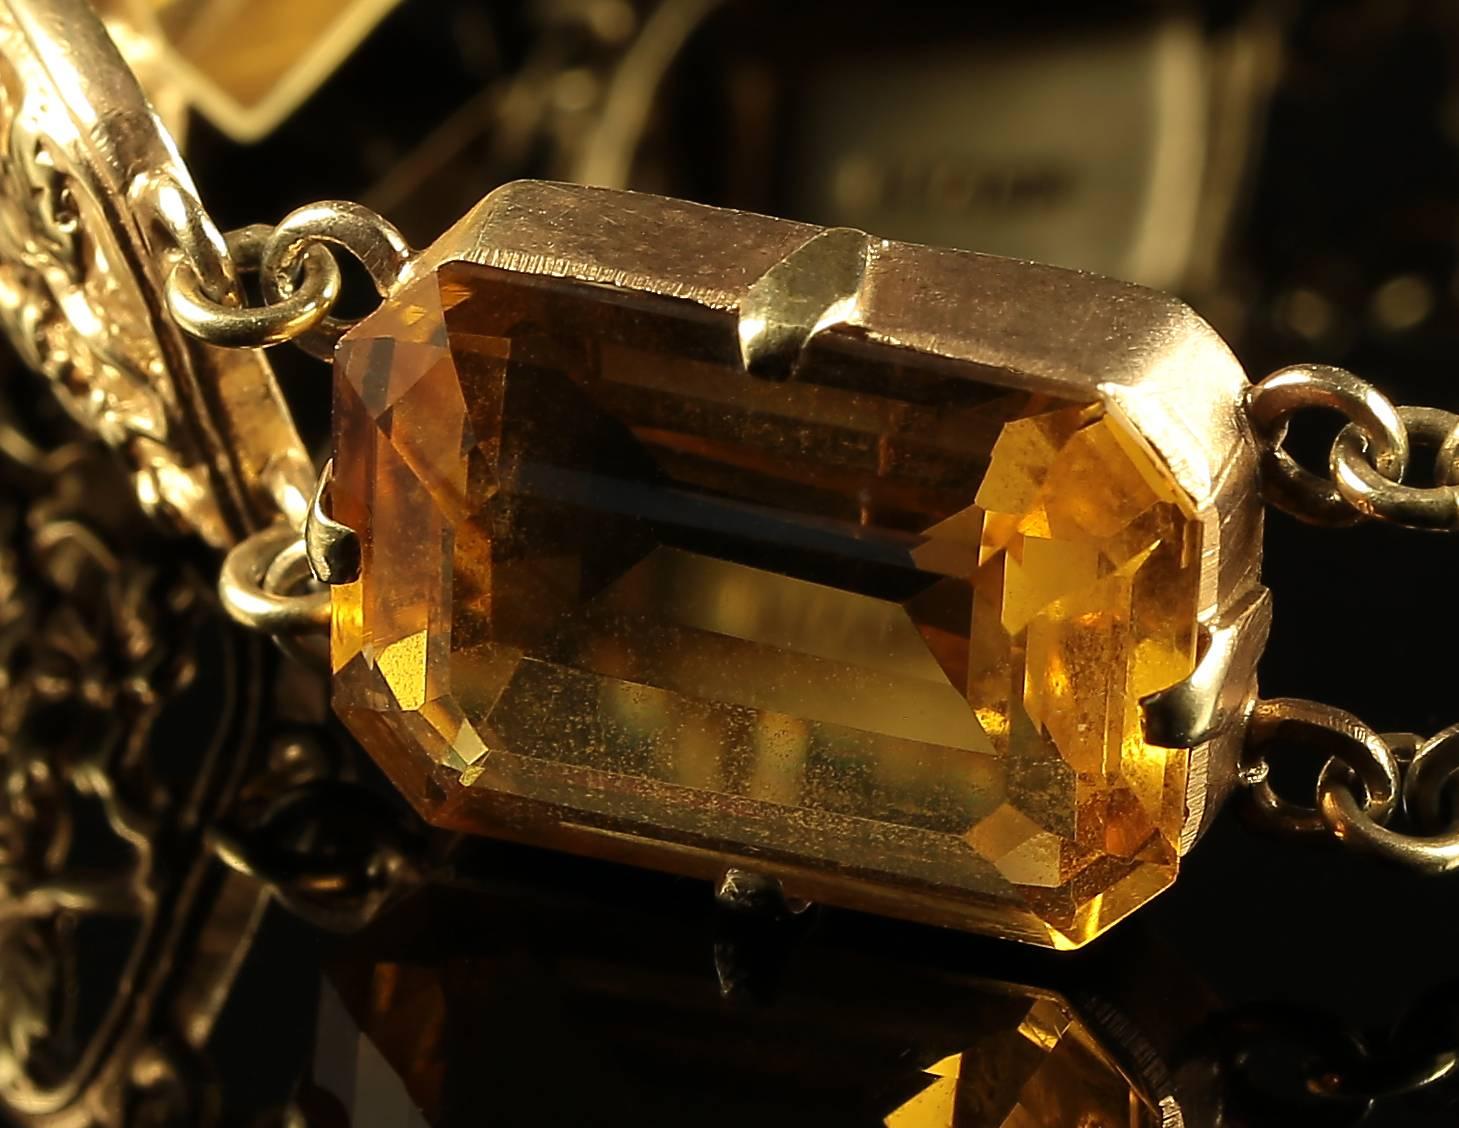 This fabulous Scottish Silver gold bracelet is stunning.

Adorned with lovely Scottish workmanship Circa 1880 and fabulous large Emerald Cut Citrines 

Each Citrine is over 16ct in size   

64ct in total 

The bracelet is silver and gilded in gold.